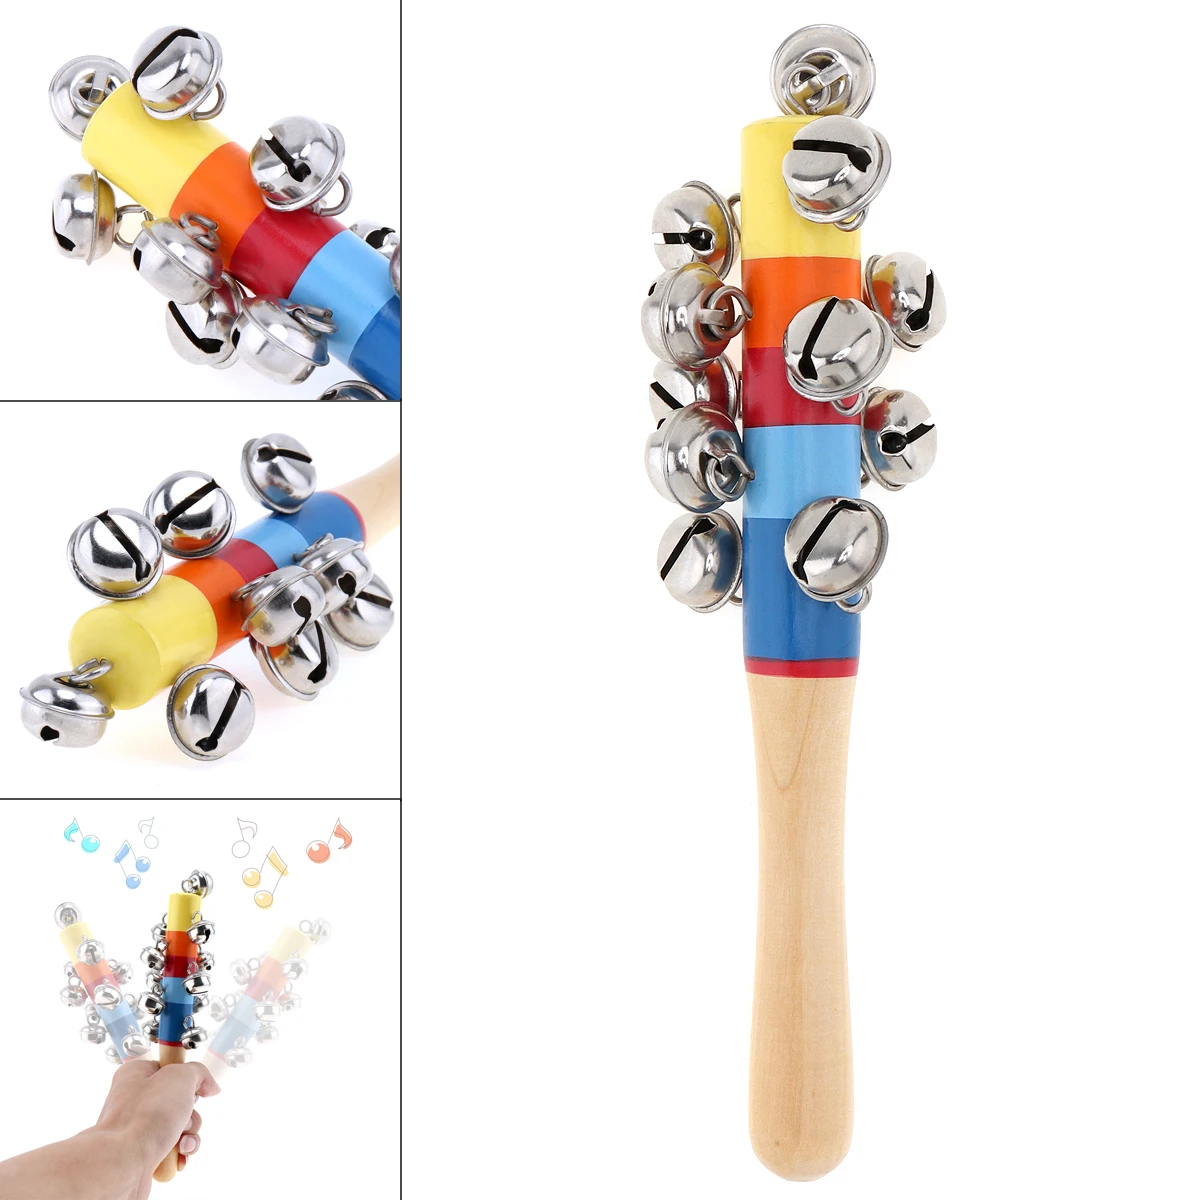 

Colorful Wooden Bell Stick 11 Jingle Bells Hand Shake Rattles Baby Kids Children Educational Musical Instrument as gift